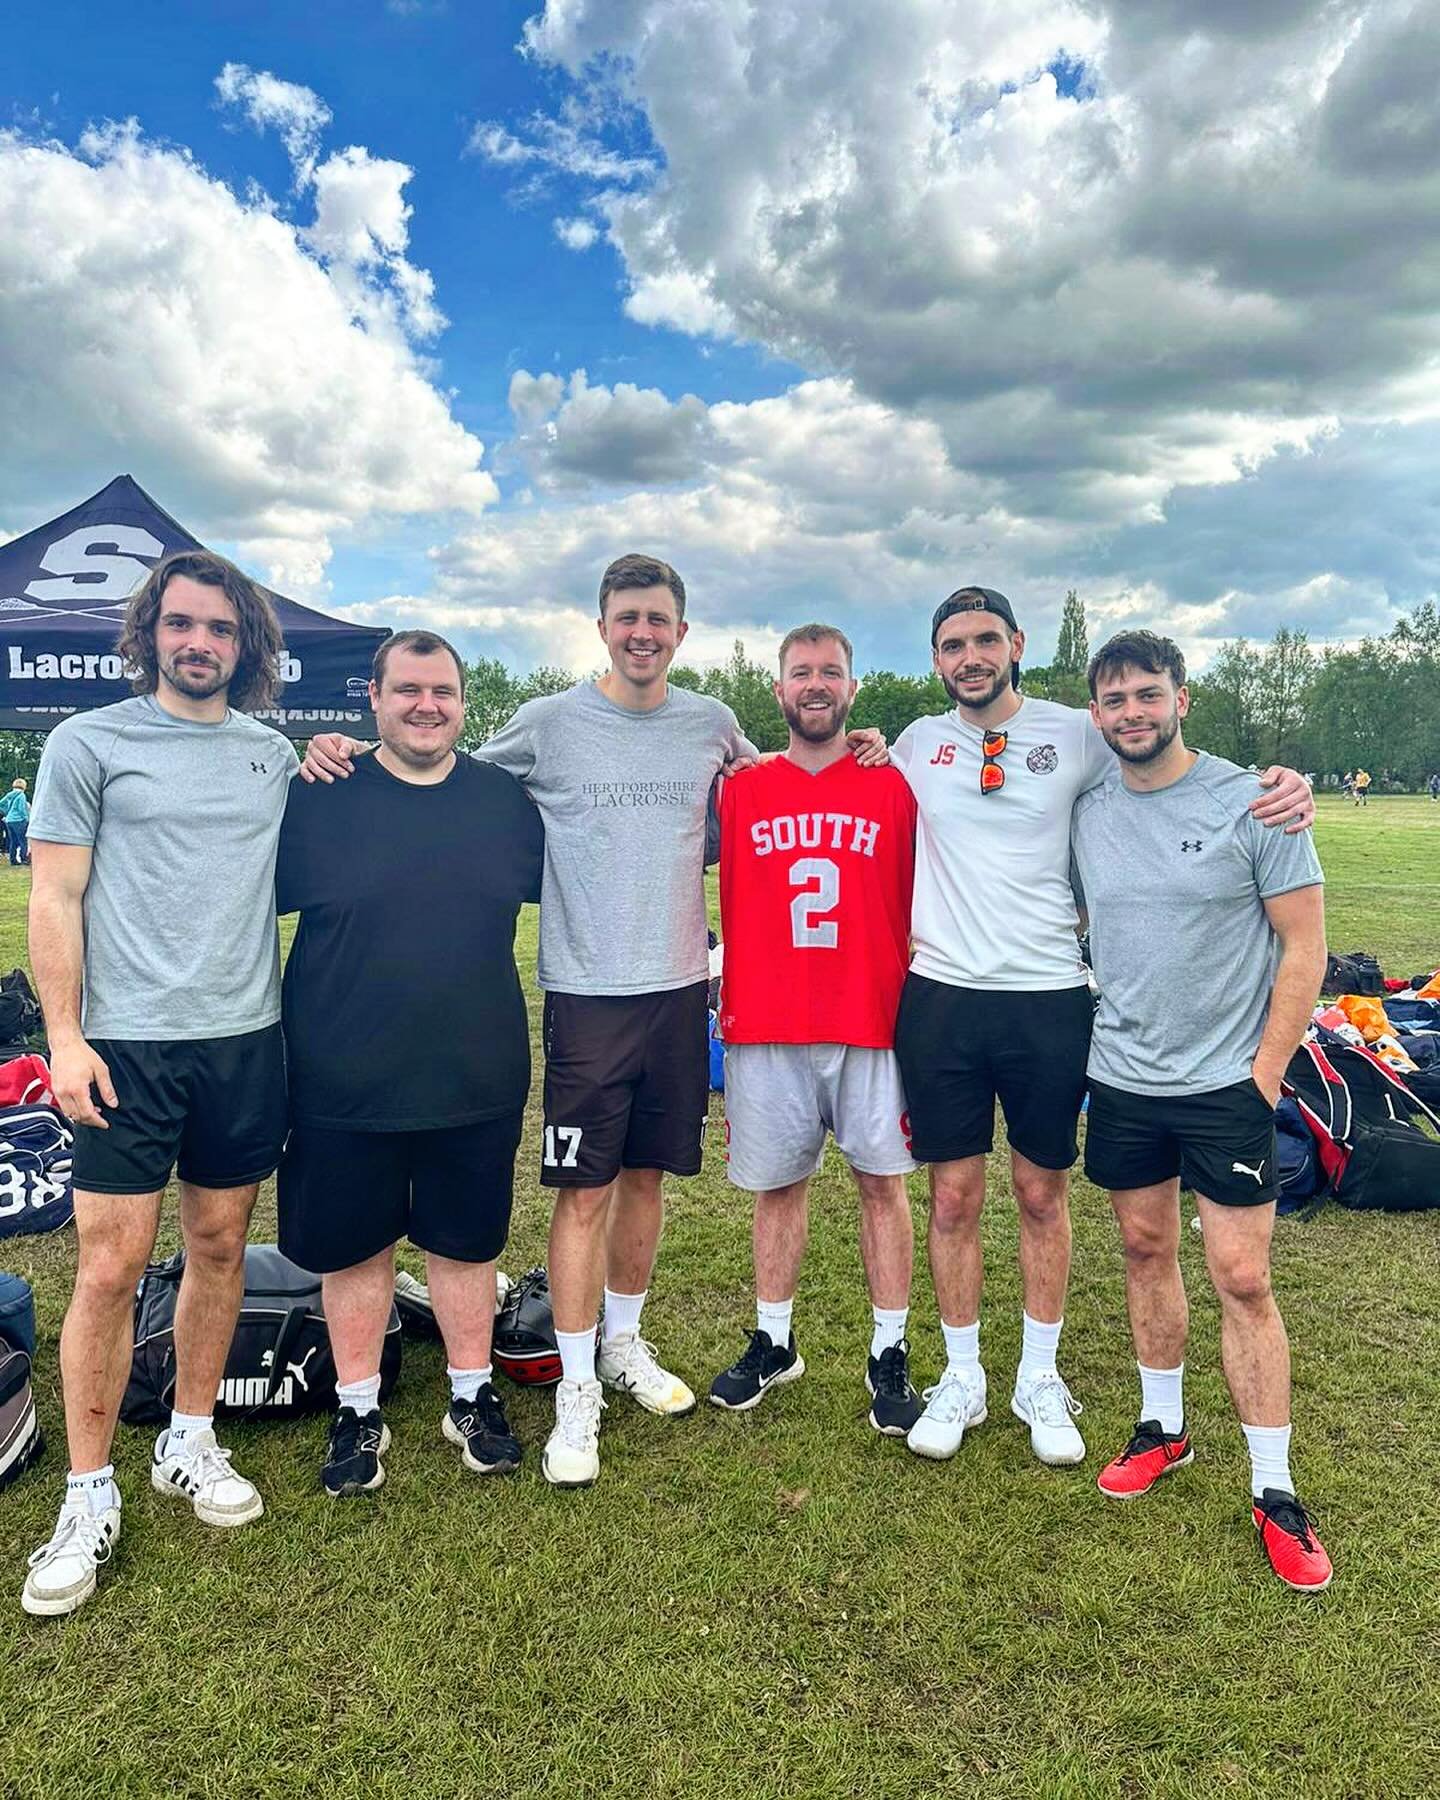 Well done to our Warriors representing @southenglandmenslacrosse this past weekend. @georgieb17 was there too but had to rush off after the final game!
#welwynwarriors #lacrosse #britishnationalchampionships #warriorscomeouttoplay